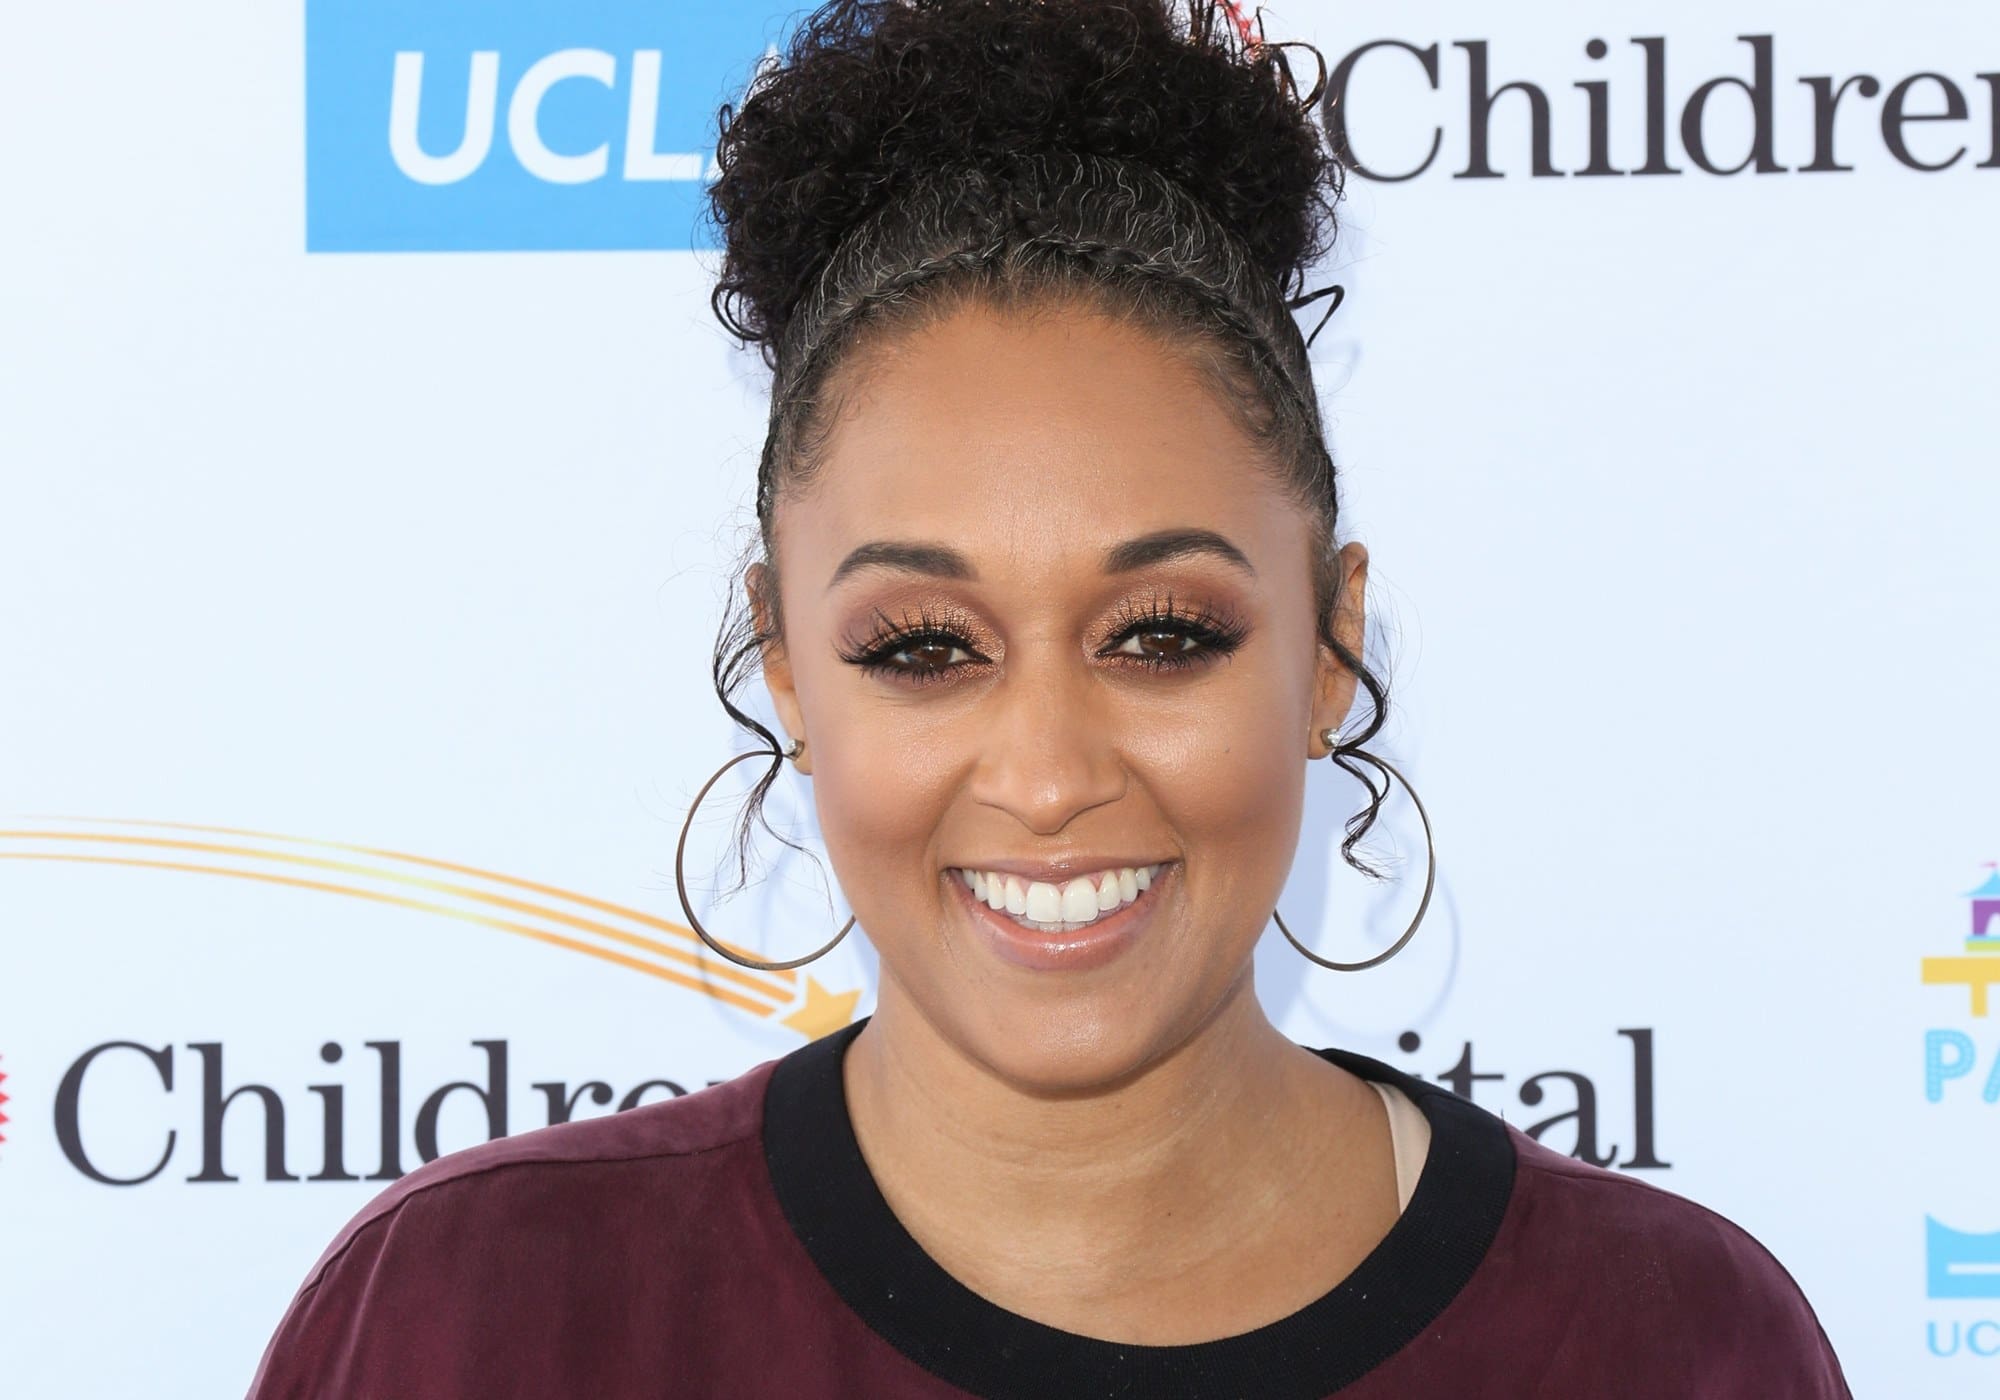 Tia Mowry Hardrict 41 Looks Ageless In Photo Where She Is Dressed As